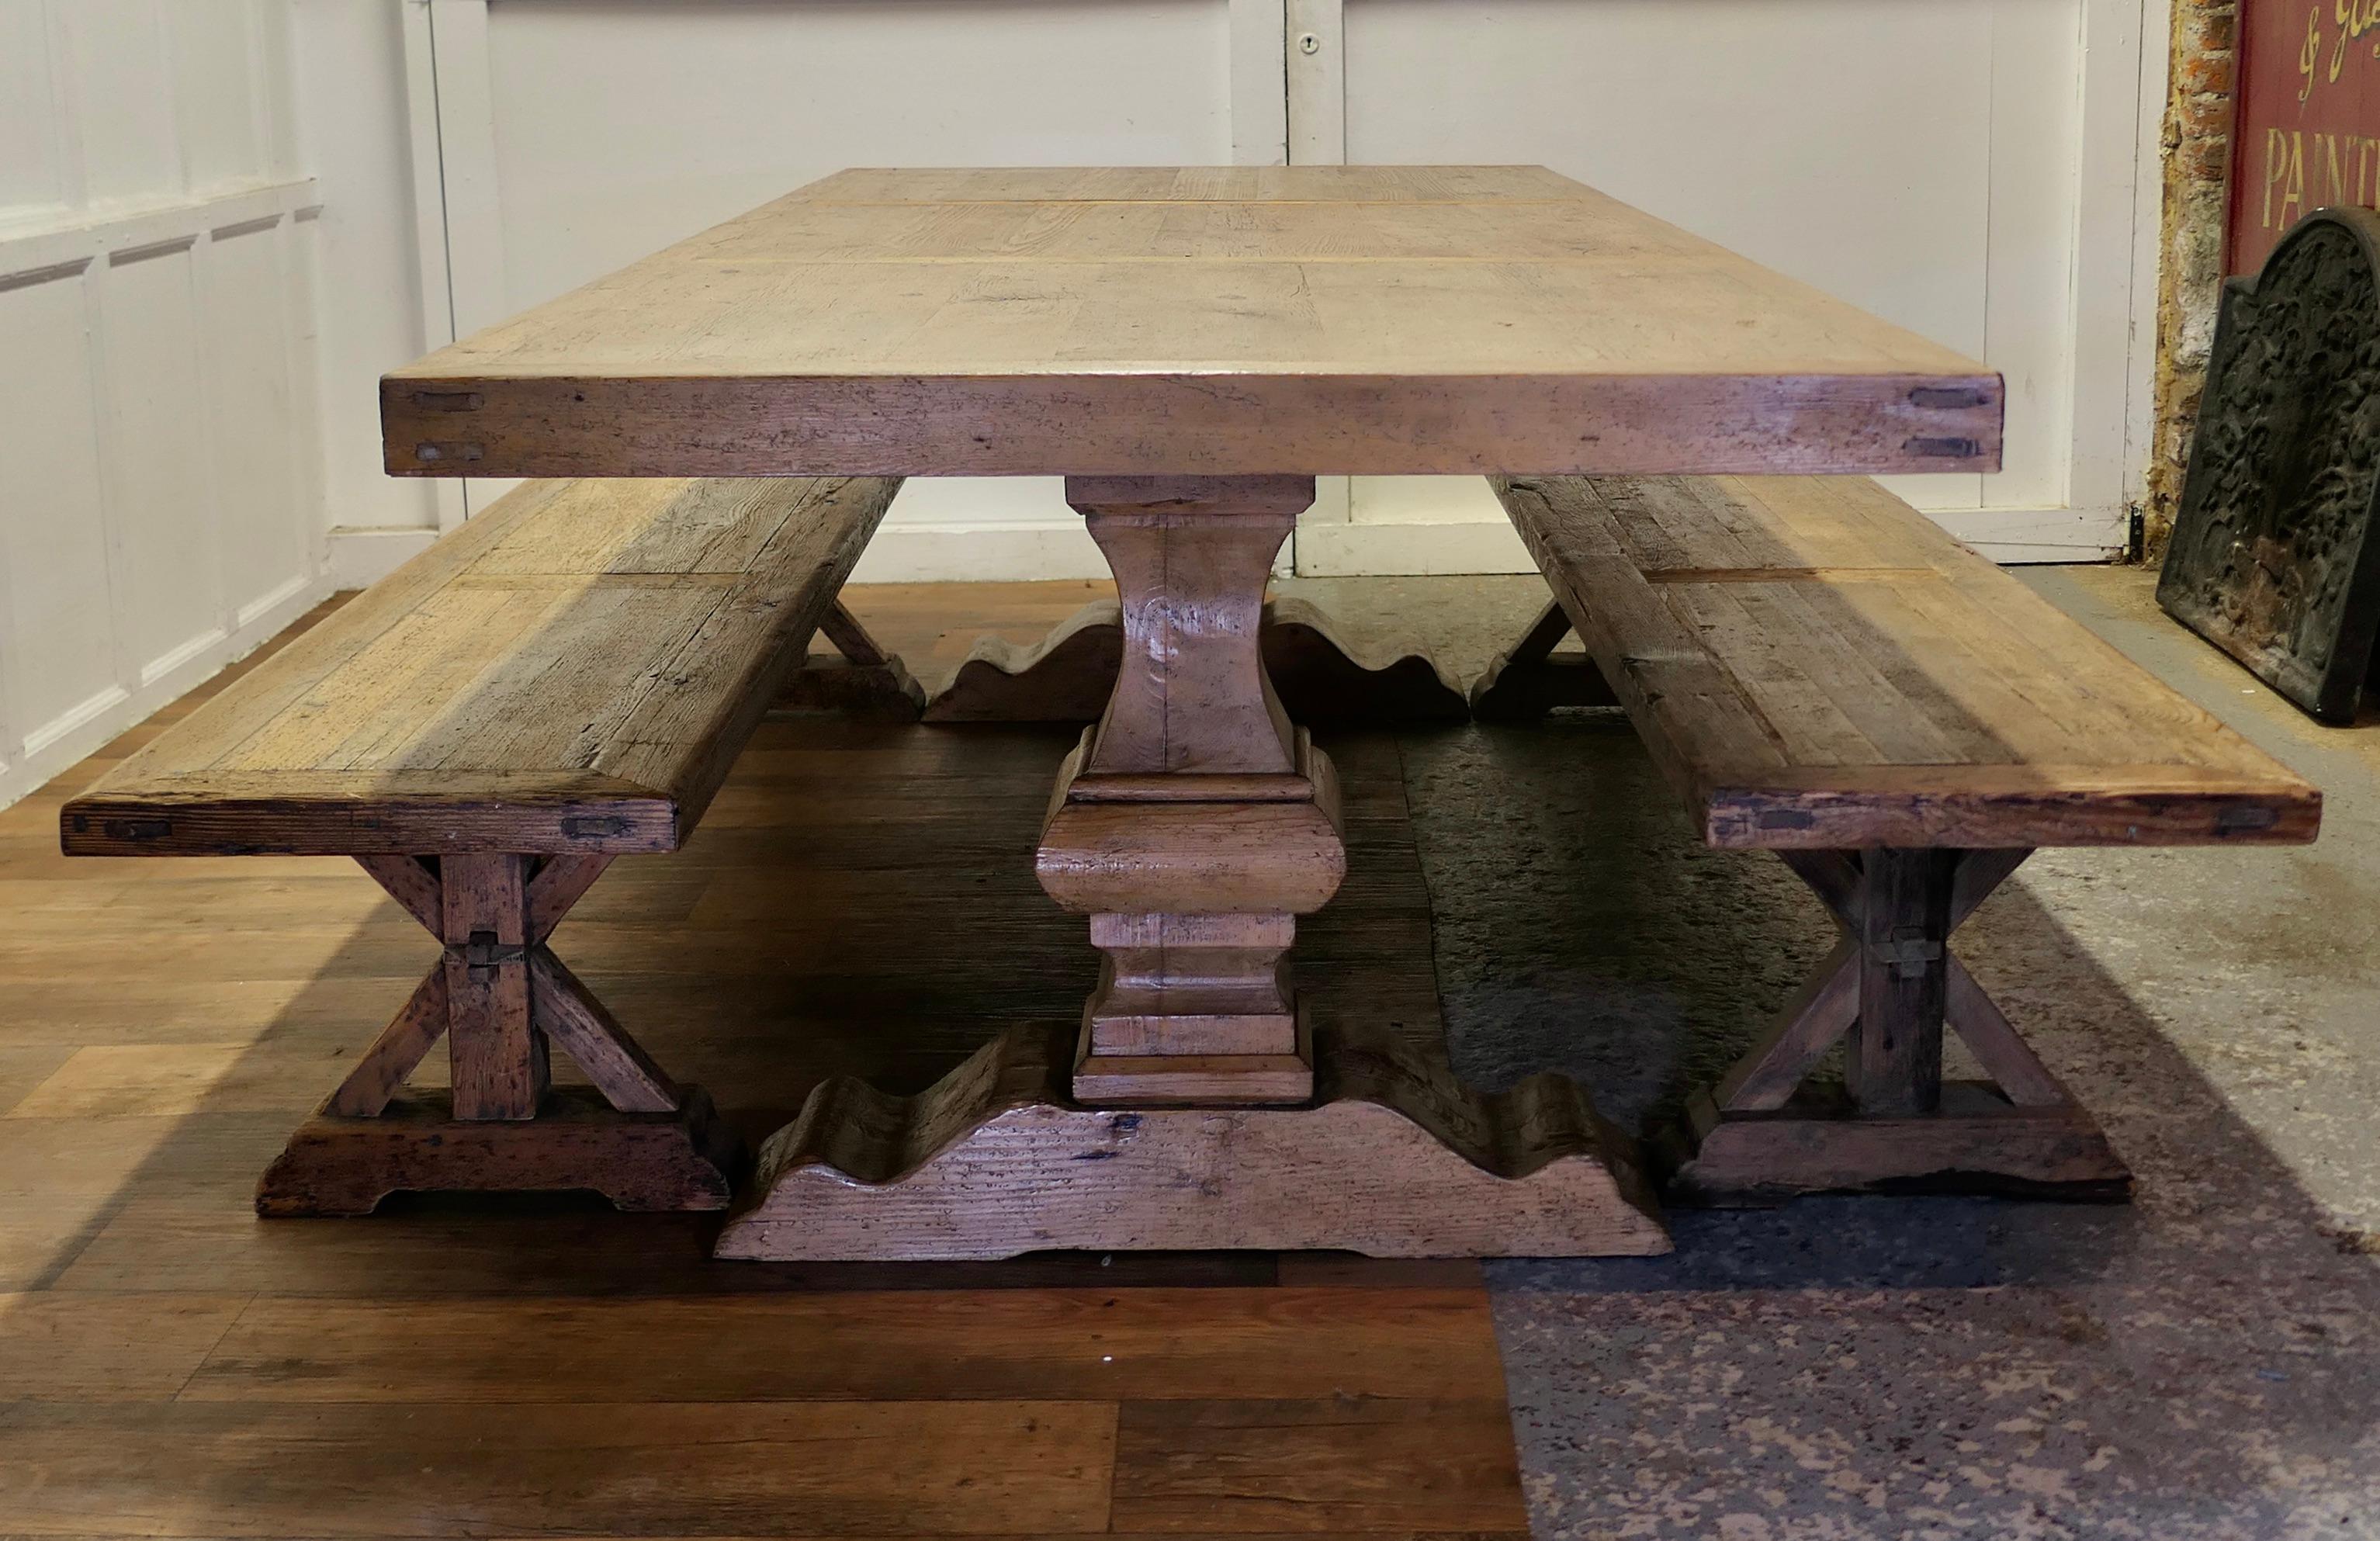 Large Pine Refectory Table With Matching Benches

A Very Large Set of Solid Pine Country Furniture, a refectory table with Matching Benches
The top has a 3” thick top, it is worth noting that the table can be dismantled for transportation
The table